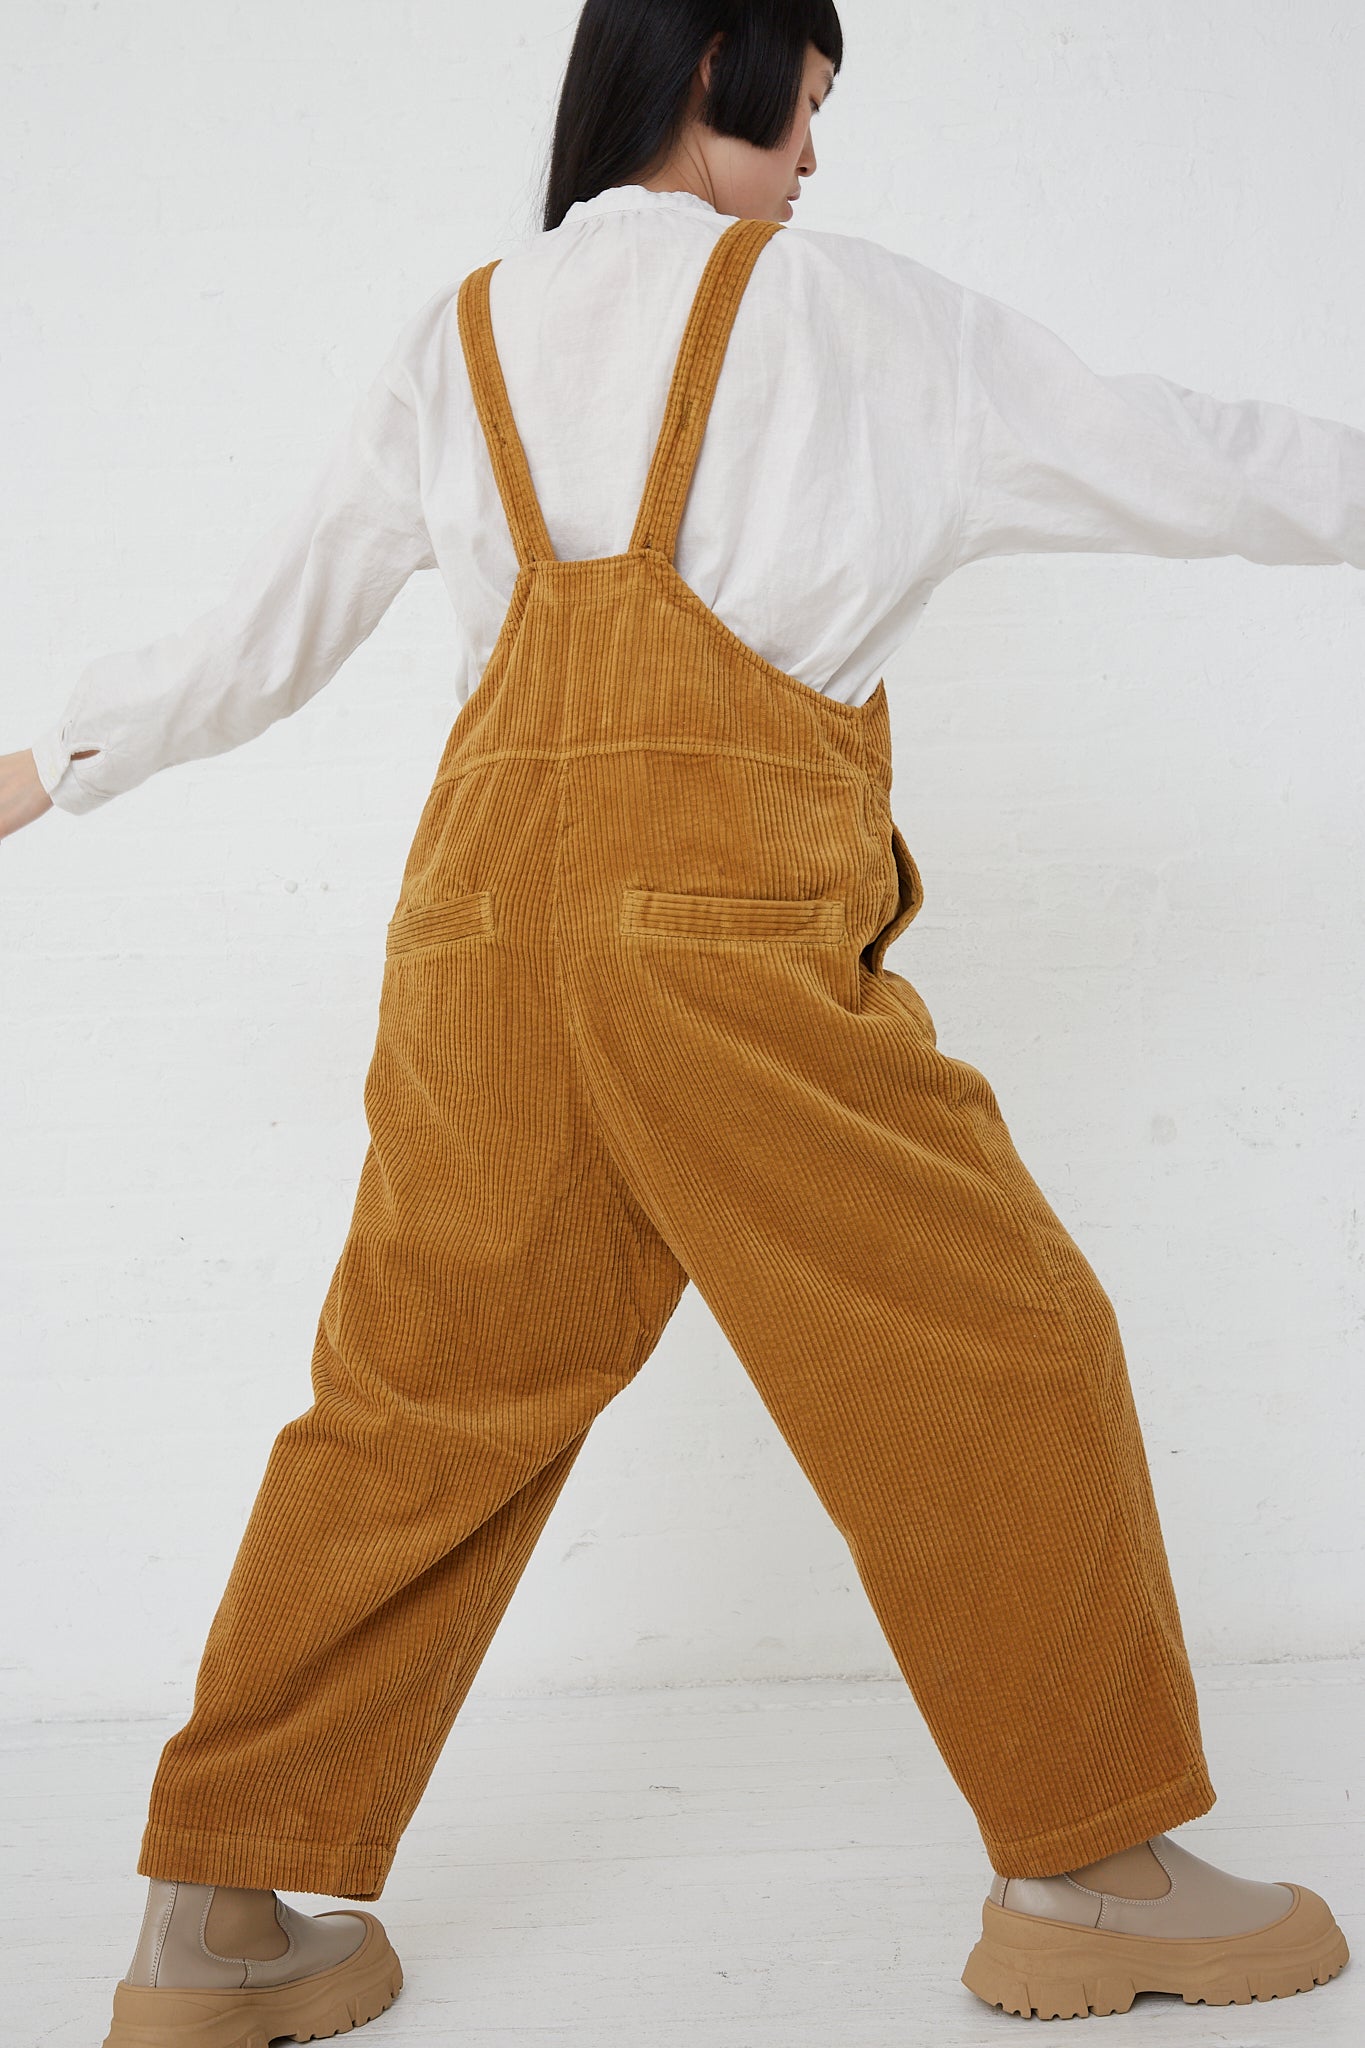 A nest Robe Cotton Corduroy Overall in Camel woman wearing a white shirt made of cotton.